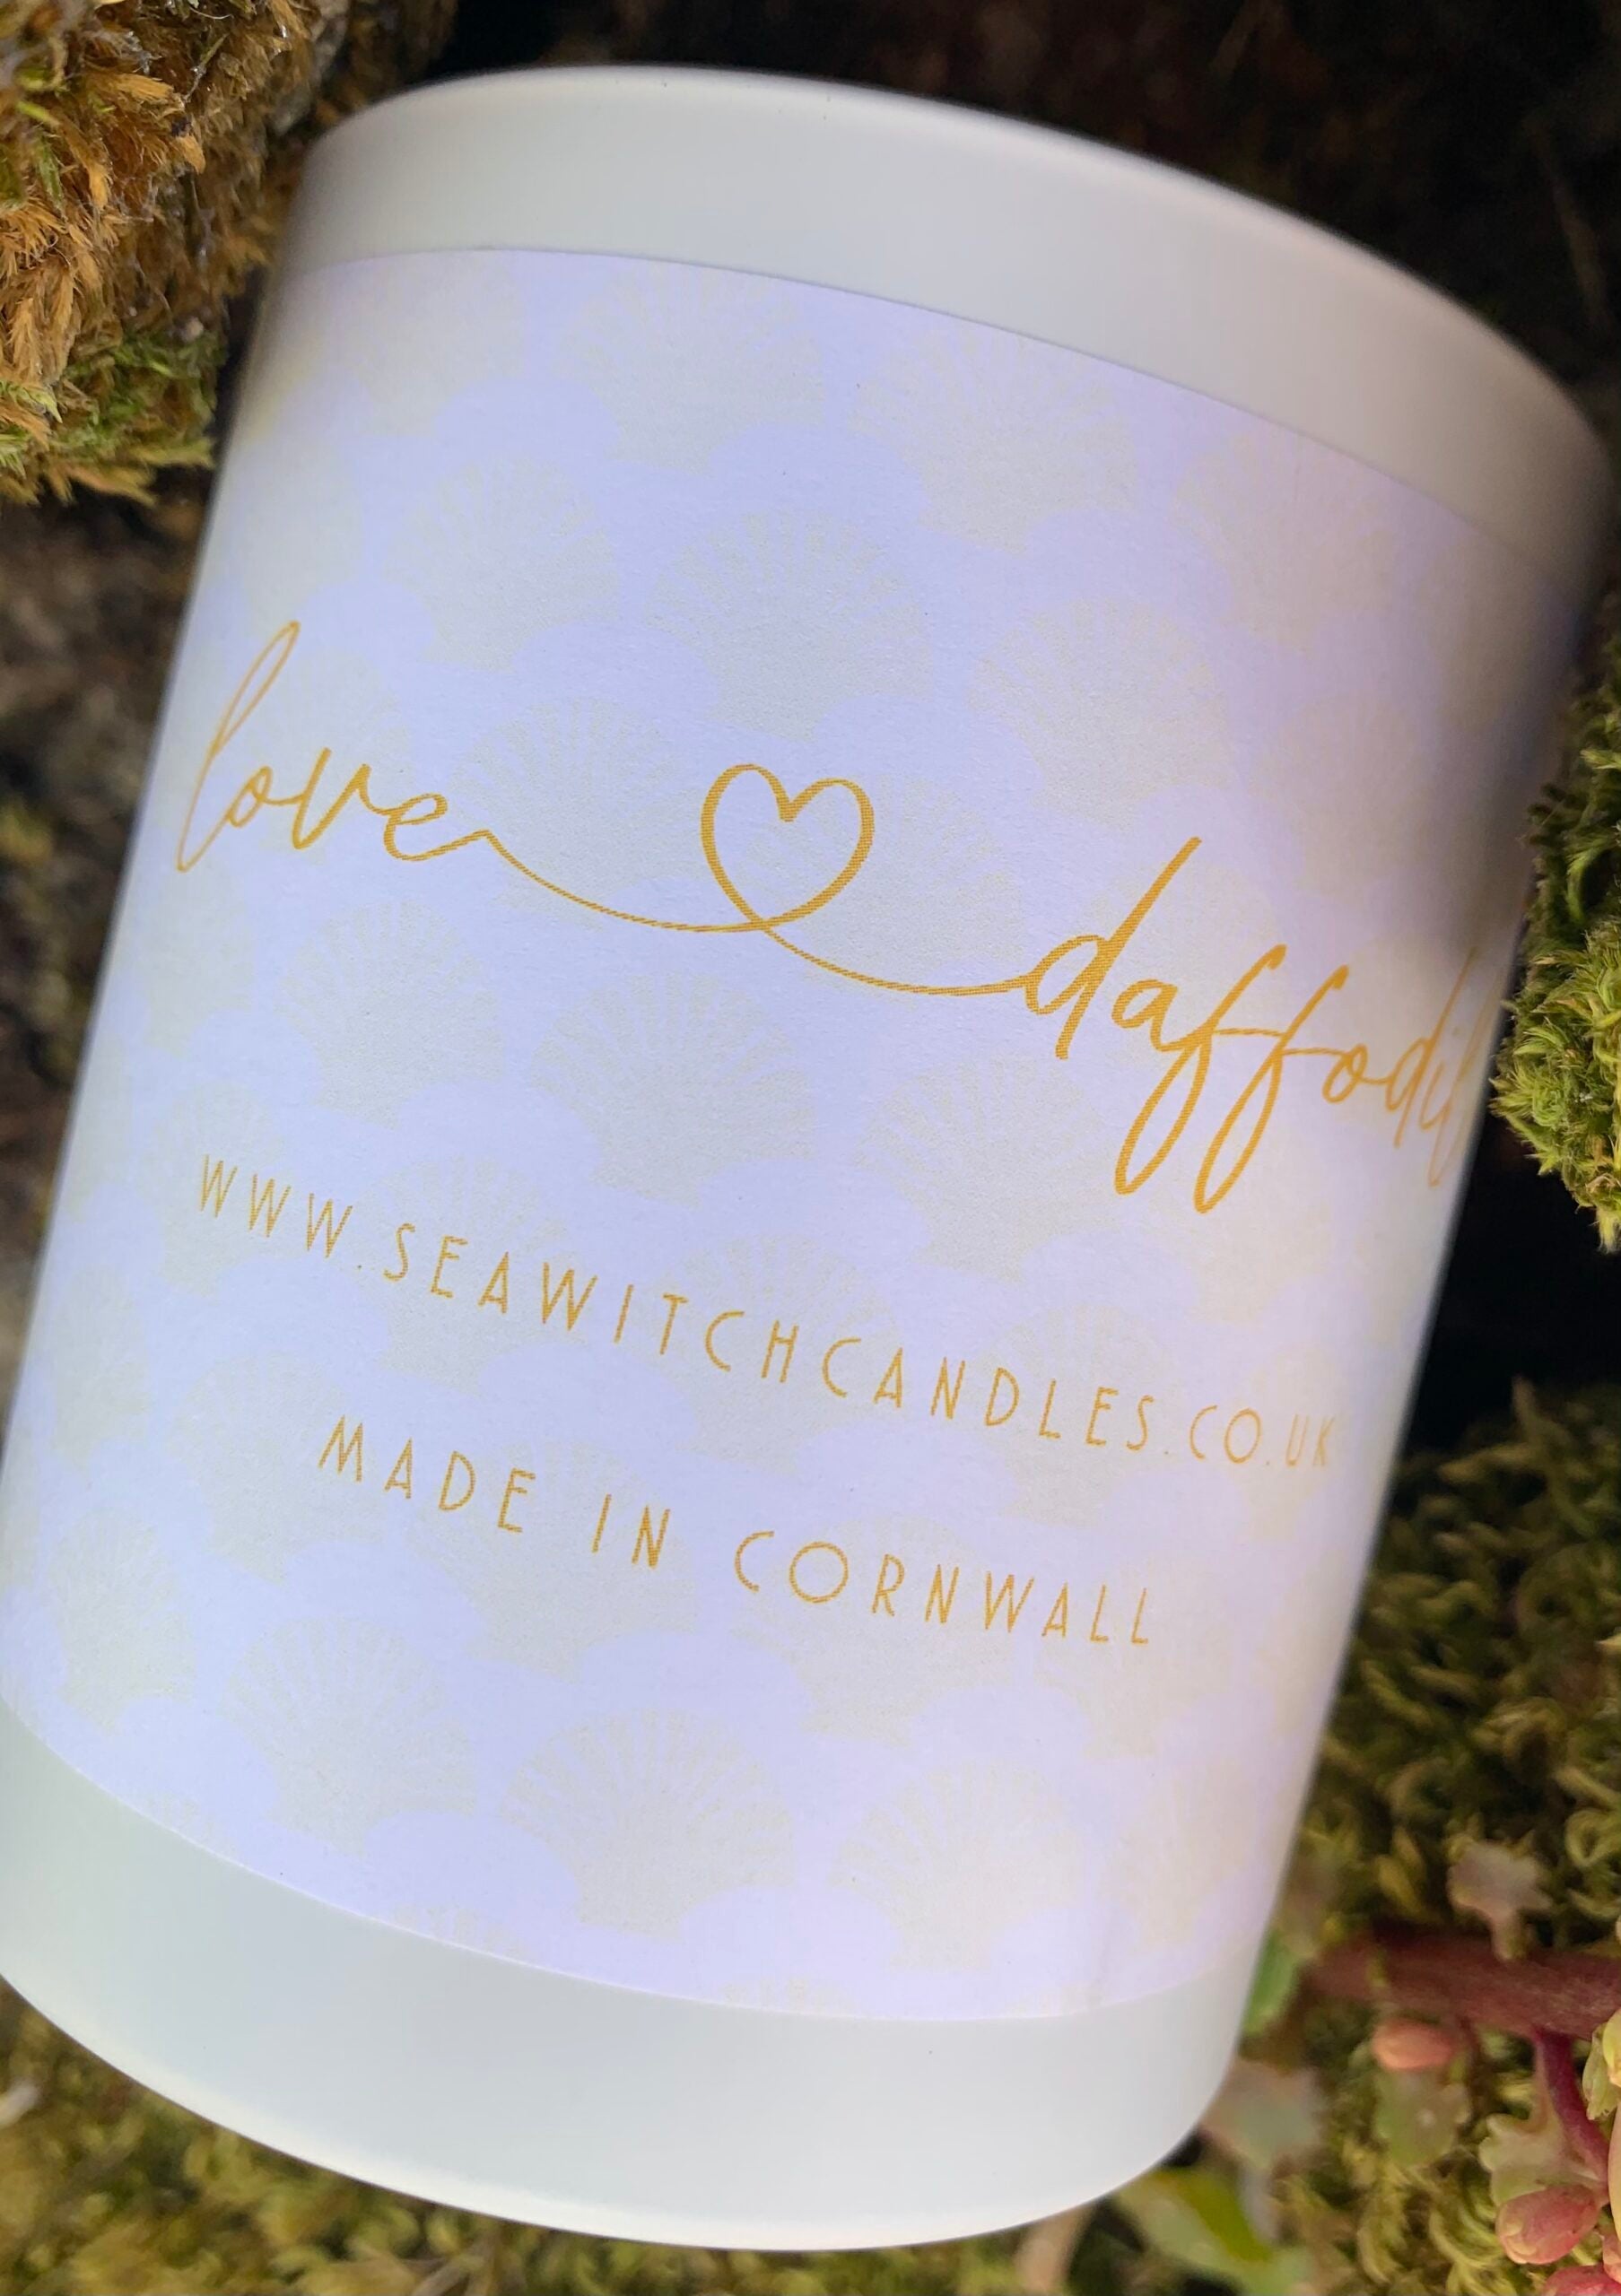 Love Daffodil Candle £22 Beautiful Daffodil Scented Candle Burn time of at least 50 hours &nbsp; Ingredients: natural vegan plant wax, fragrance oils, cotton wick &nbsp; This candle is hand poured into a white china pot and is made in Mousehole, Cornwall by Seawitch Candles Love Candles. Love Florals. Candle lover, Cornish daffodils, tete a tete, Daffs, shop small, shop handmade.